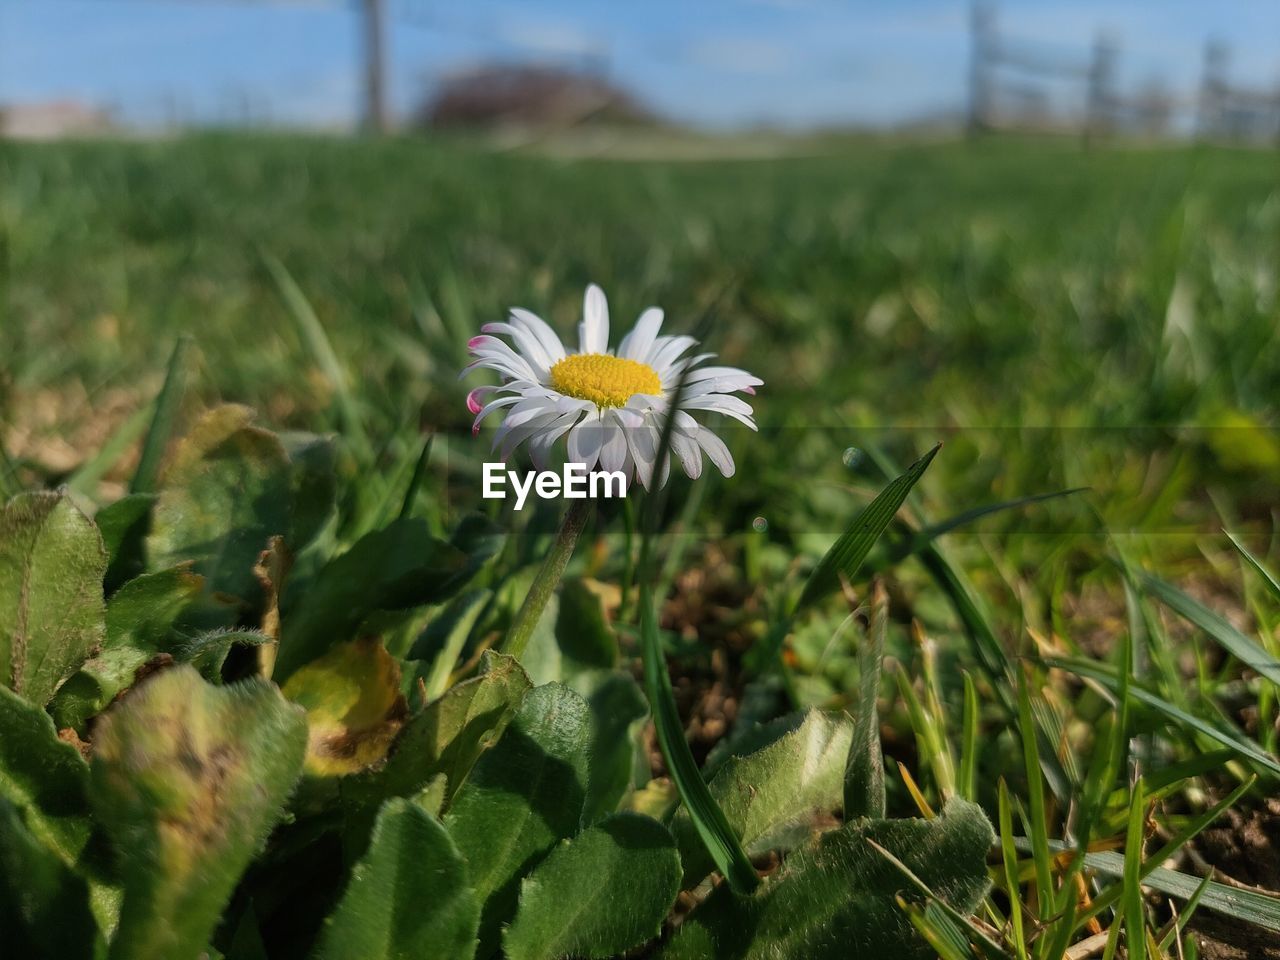 plant, flower, flowering plant, beauty in nature, freshness, field, nature, growth, flower head, fragility, meadow, grass, inflorescence, petal, close-up, sky, green, land, no people, environment, focus on foreground, wildflower, daisy, landscape, day, prairie, outdoors, yellow, springtime, pollen, white, botany, blossom, leaf, rural scene, plant part